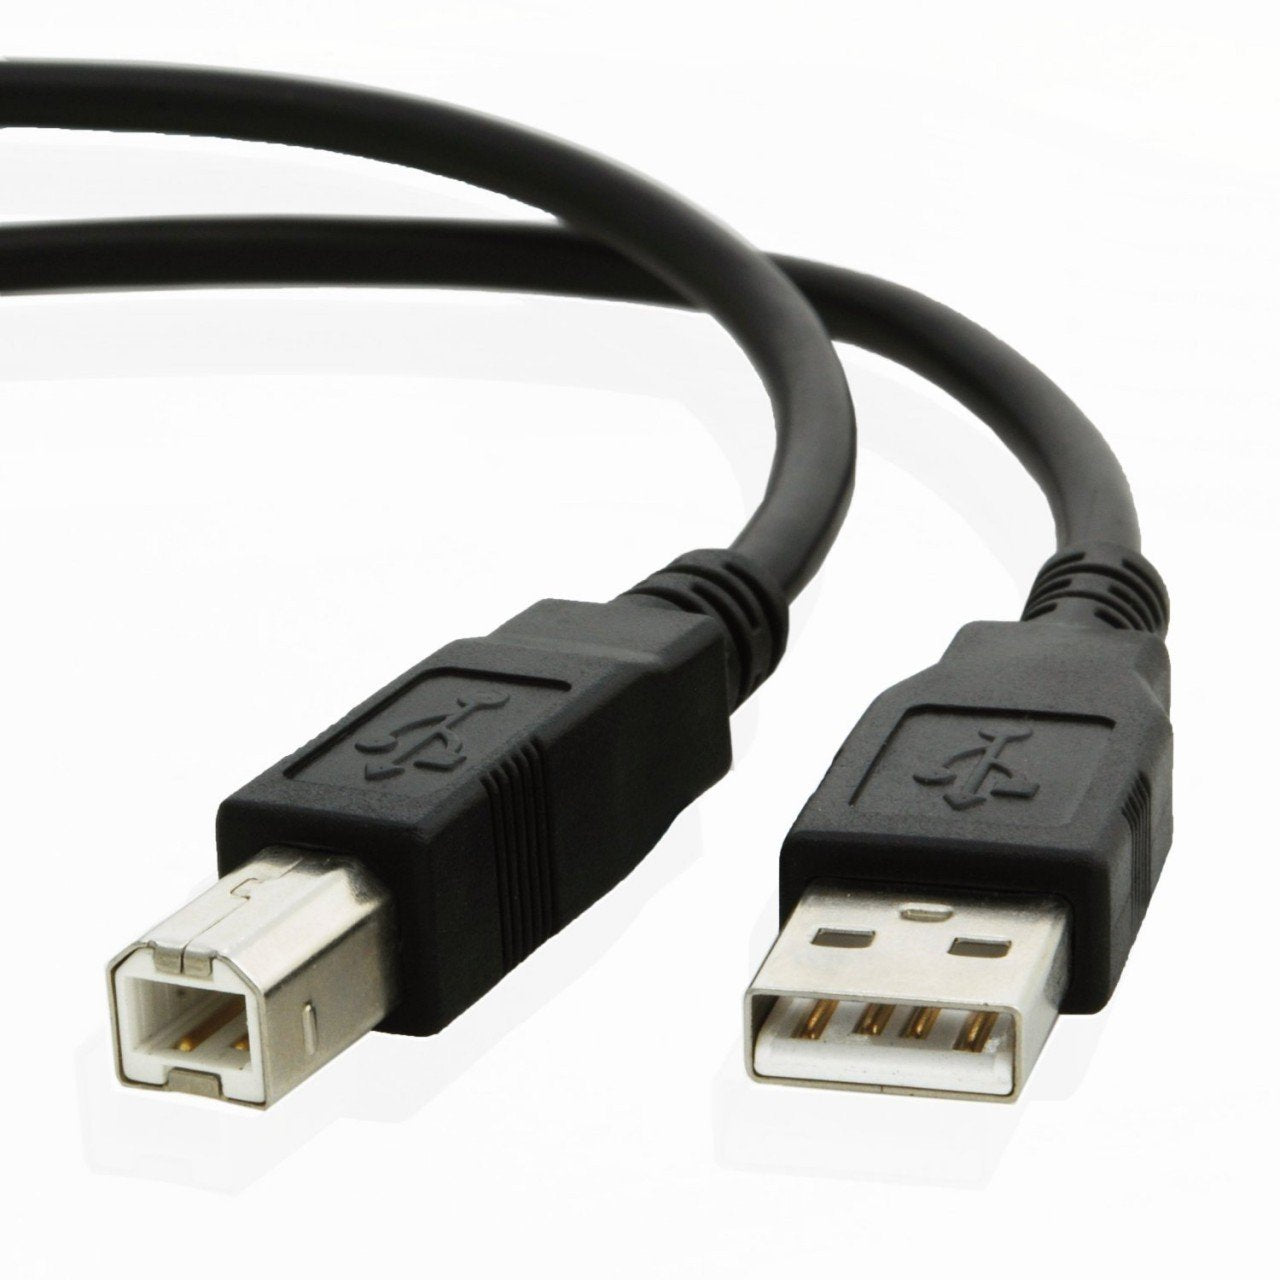 USB cable for Canon PIXMA MG5721